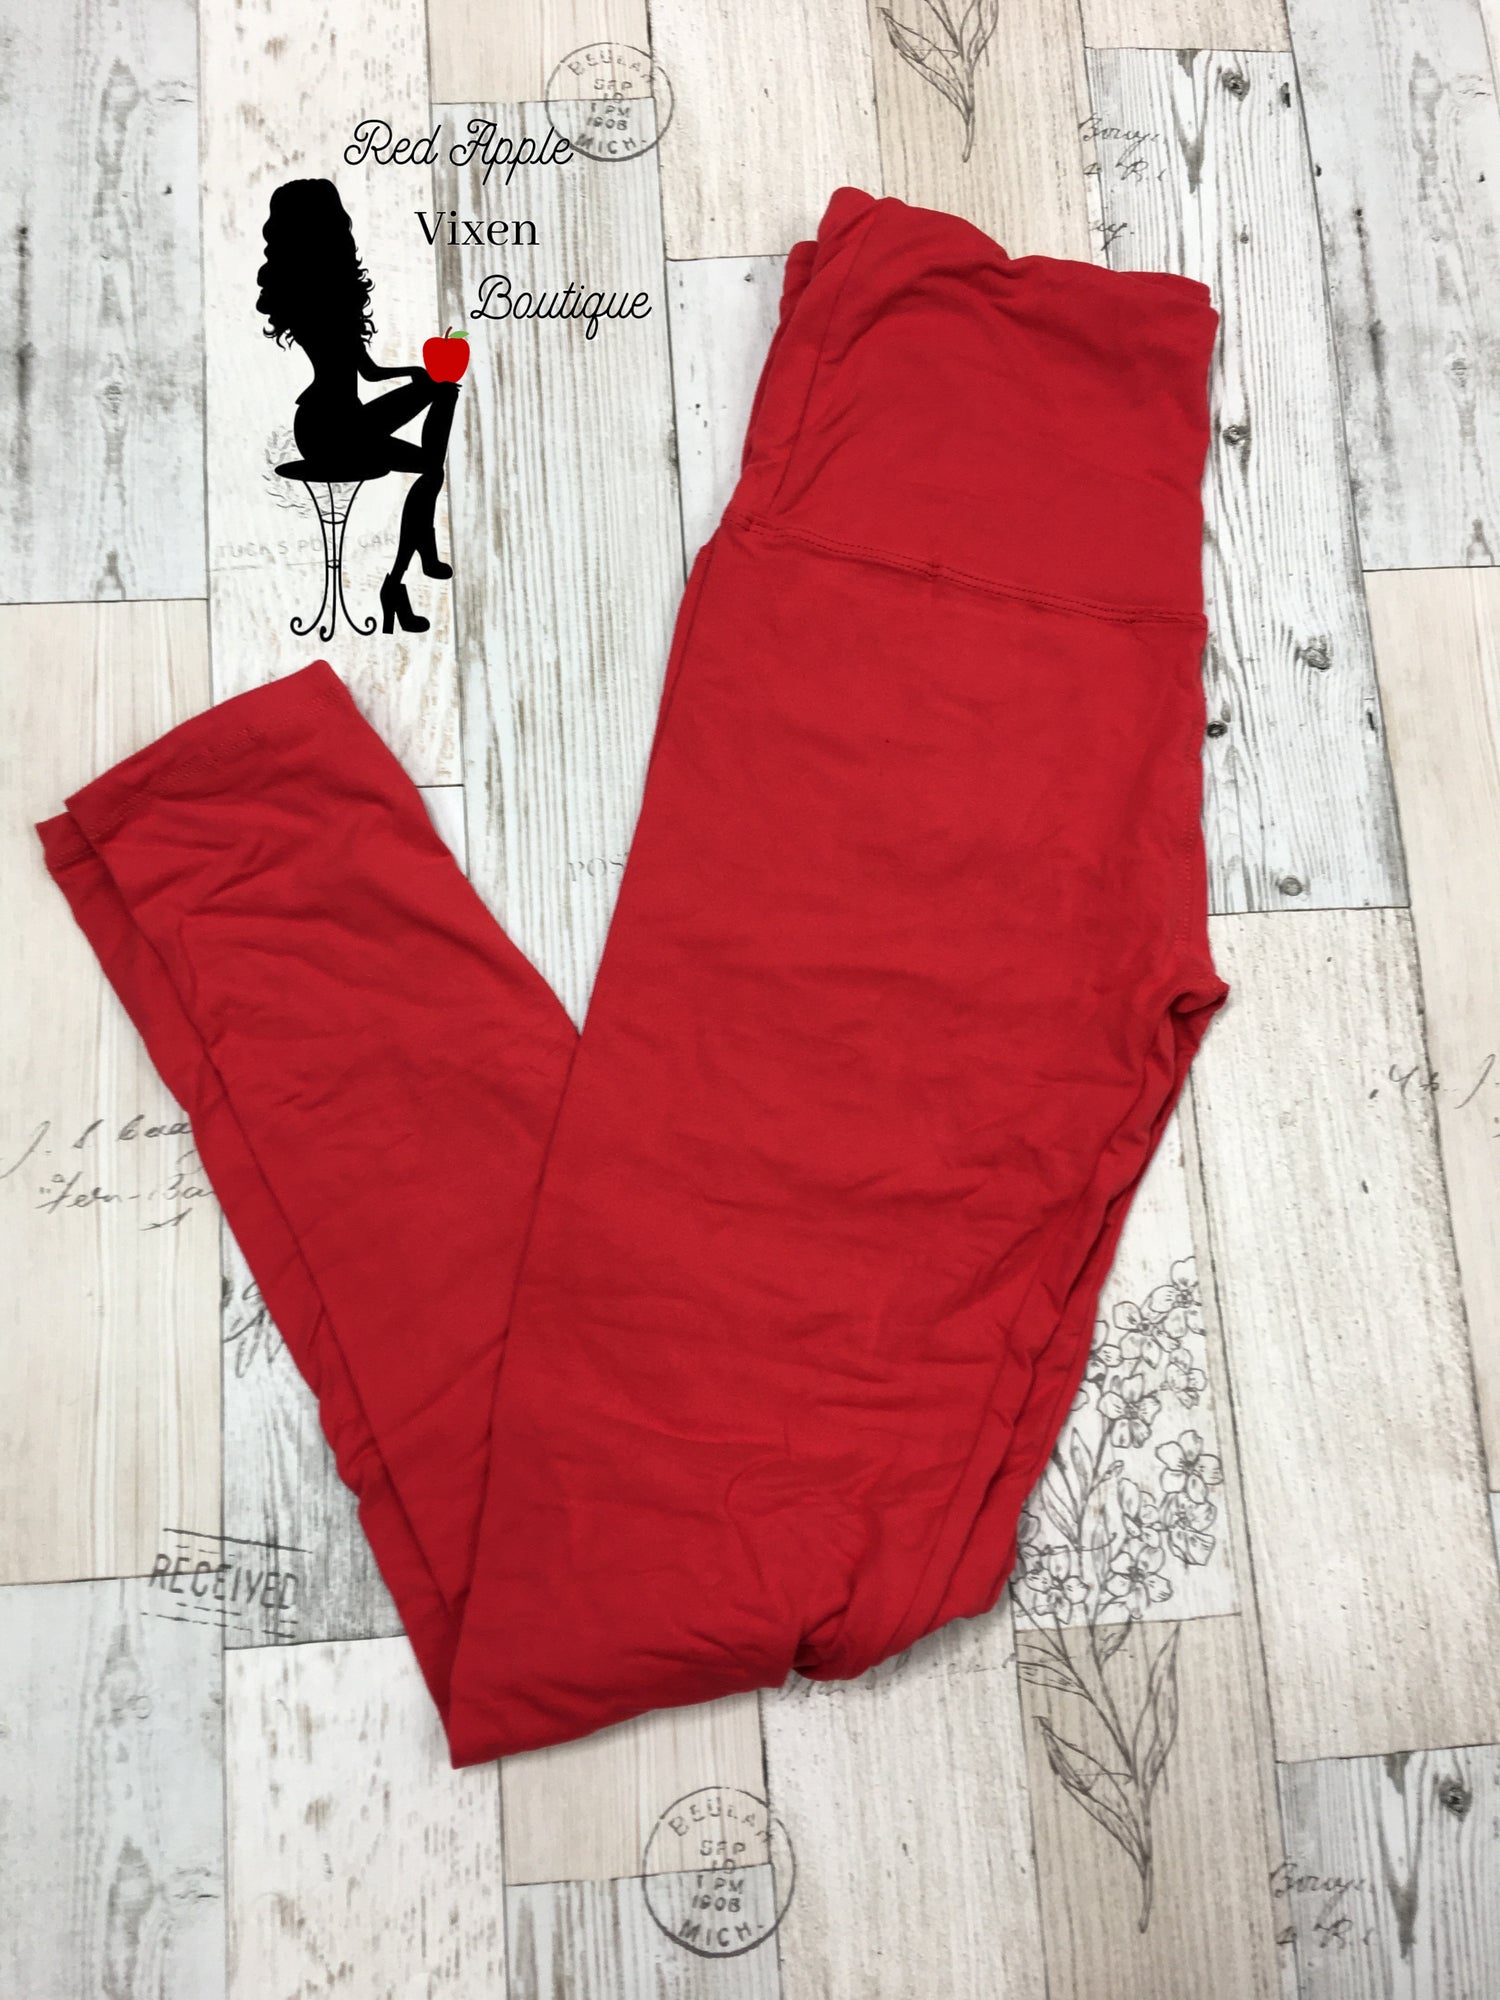 Extra Plus Size Solid Colored Full Length Leggings - Red Apple Vixen Boutique